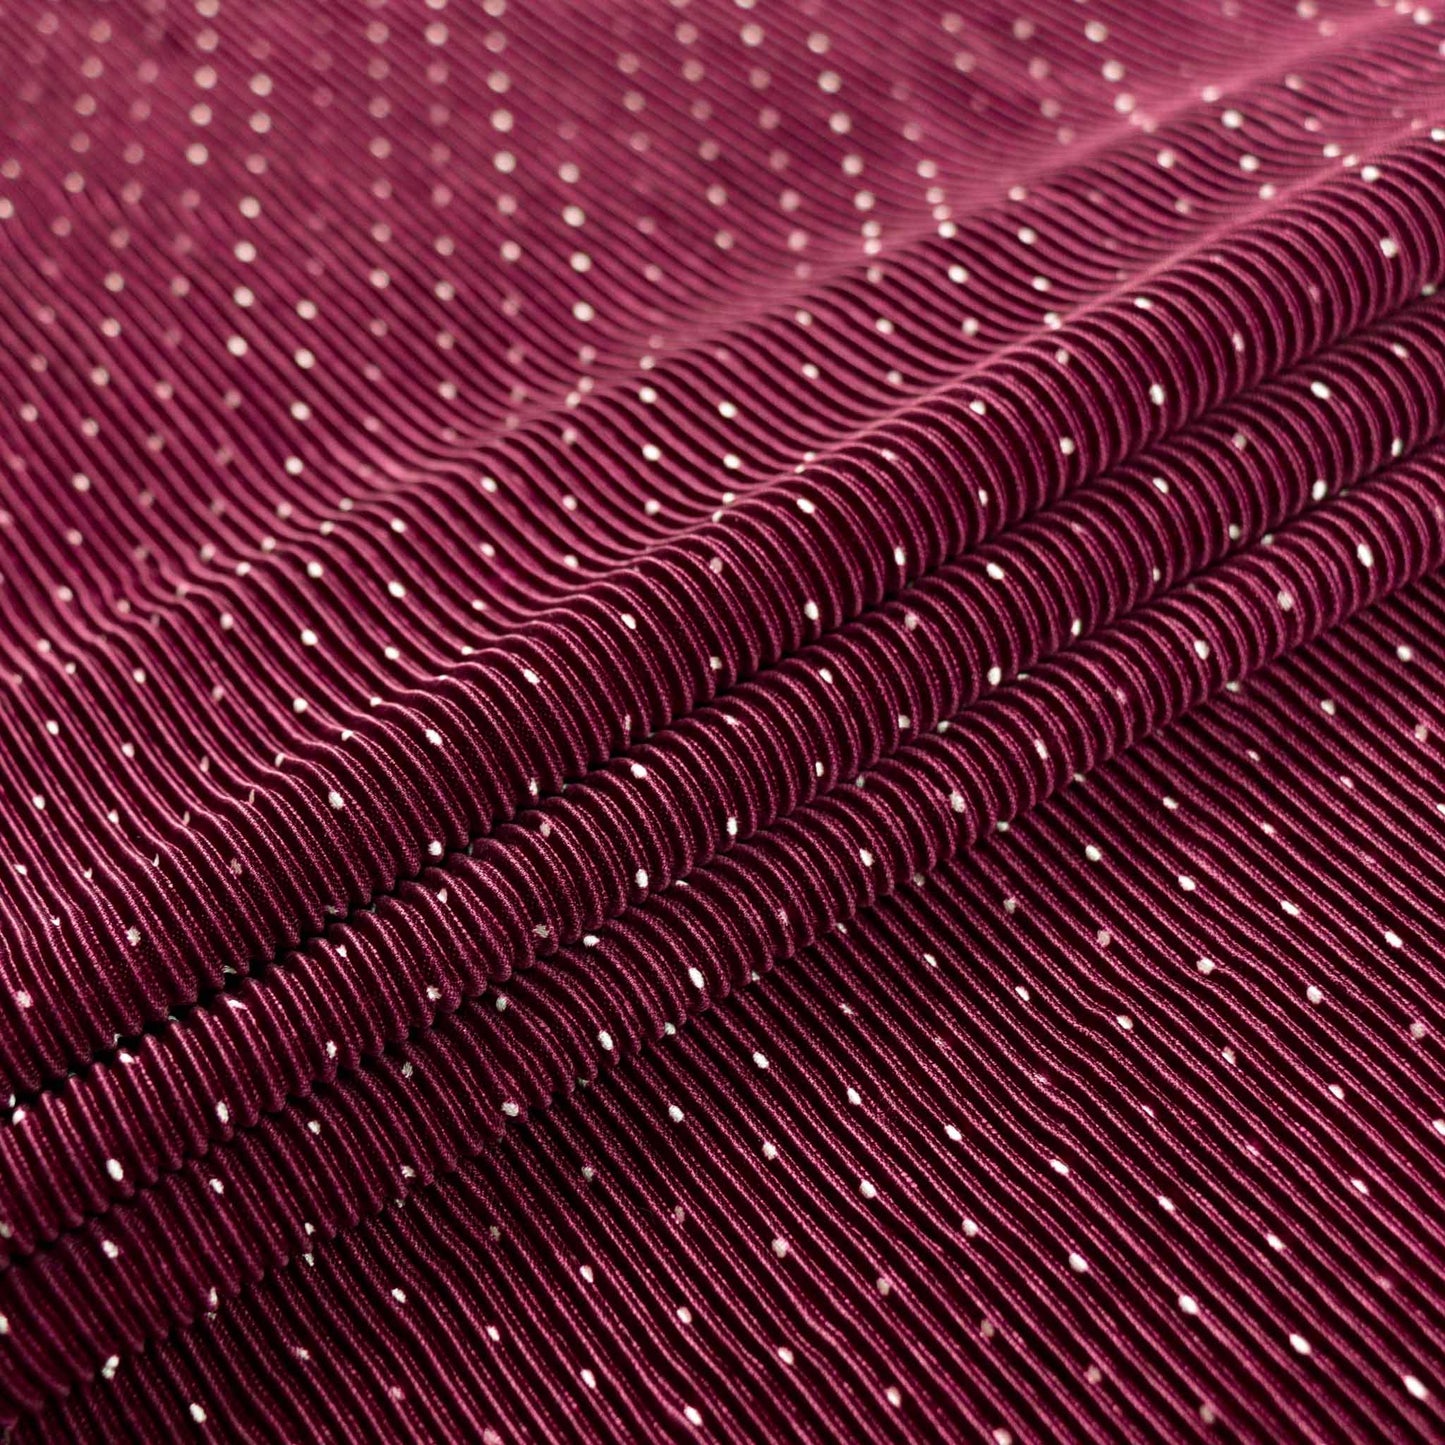 shimmer effect maroon pleated plisse dressmaking fabric with white polka dot pattern